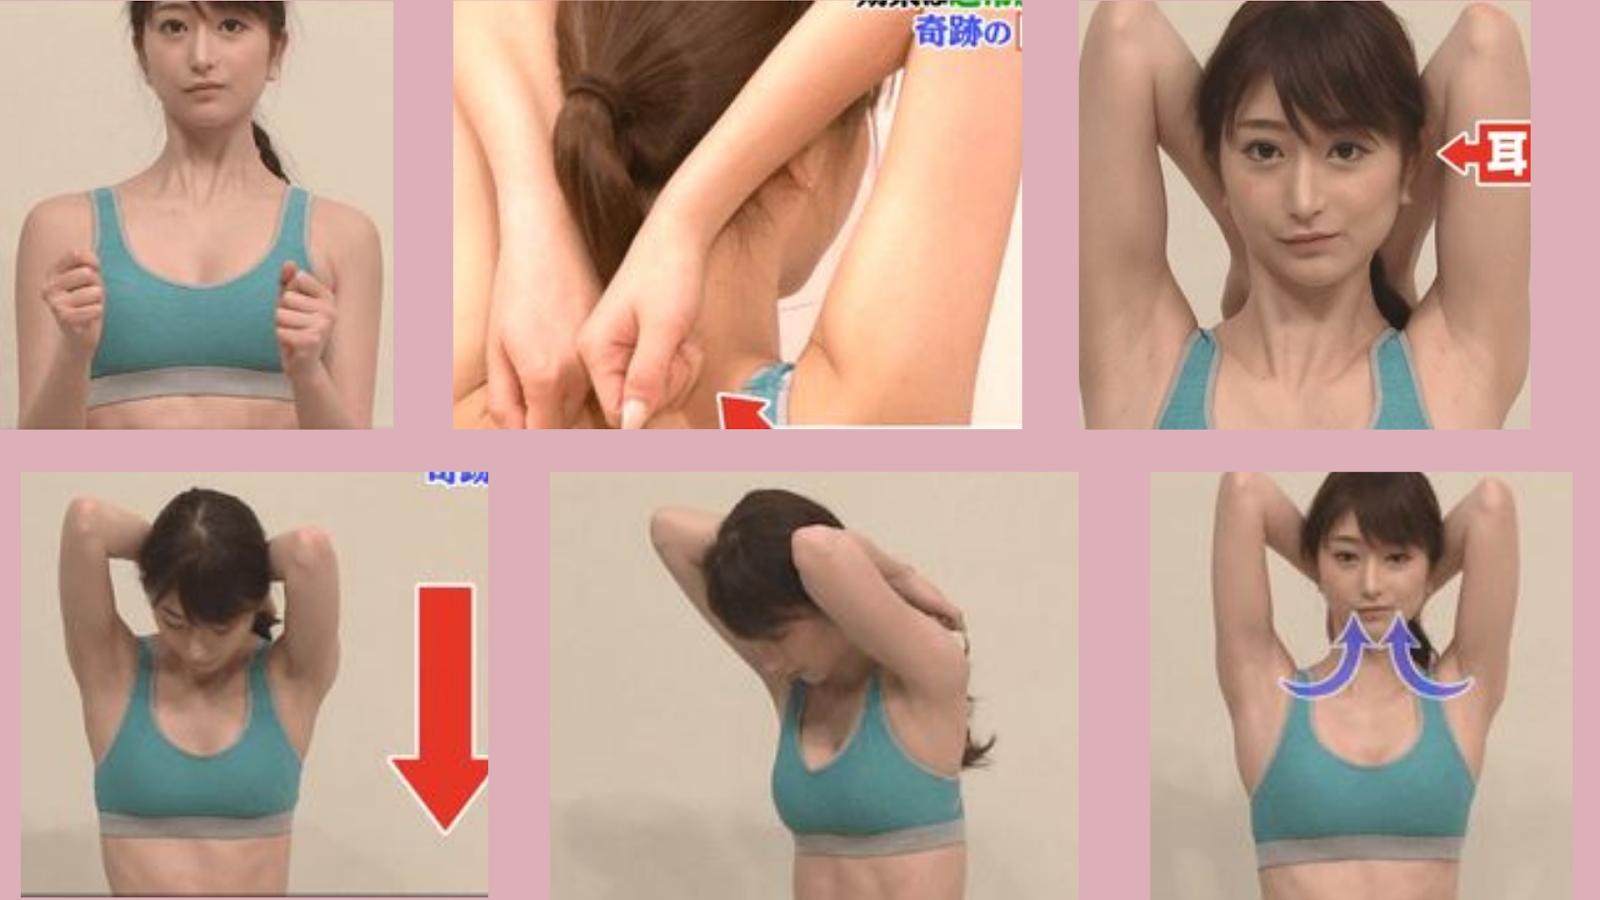 A Japanese expert teaches you 4 weight loss moves, regaining your ant's waistline after only 2 weeks without dieting - Photo 2.